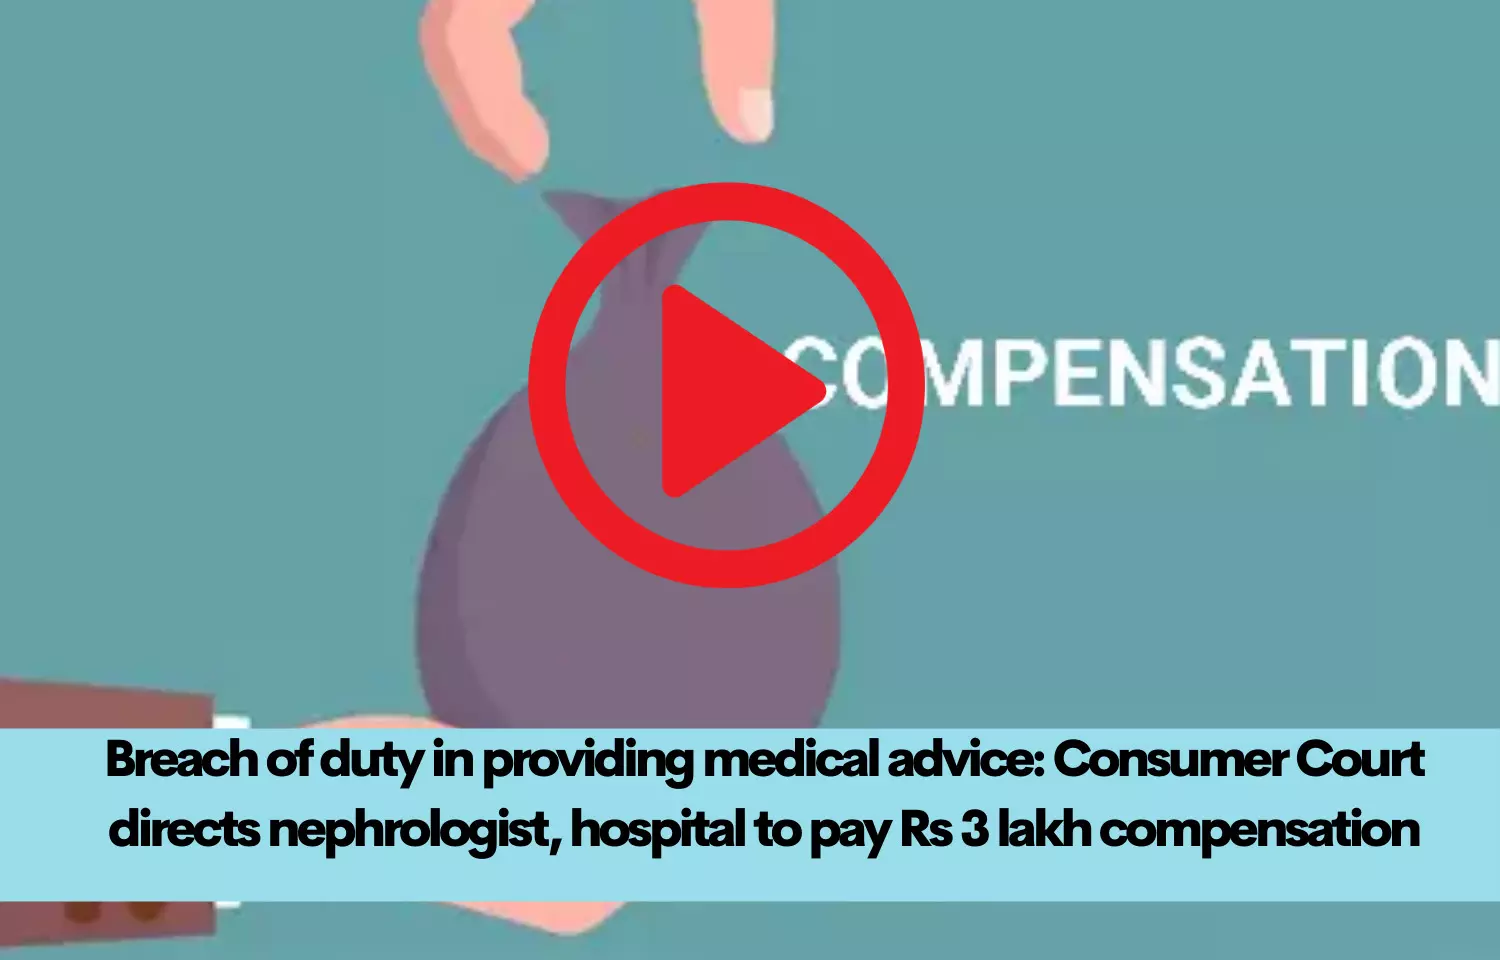 Breach of duty in providing medical advice: Consumer court directs nephrologist, hospital to pay Rs 3 lakh compensation